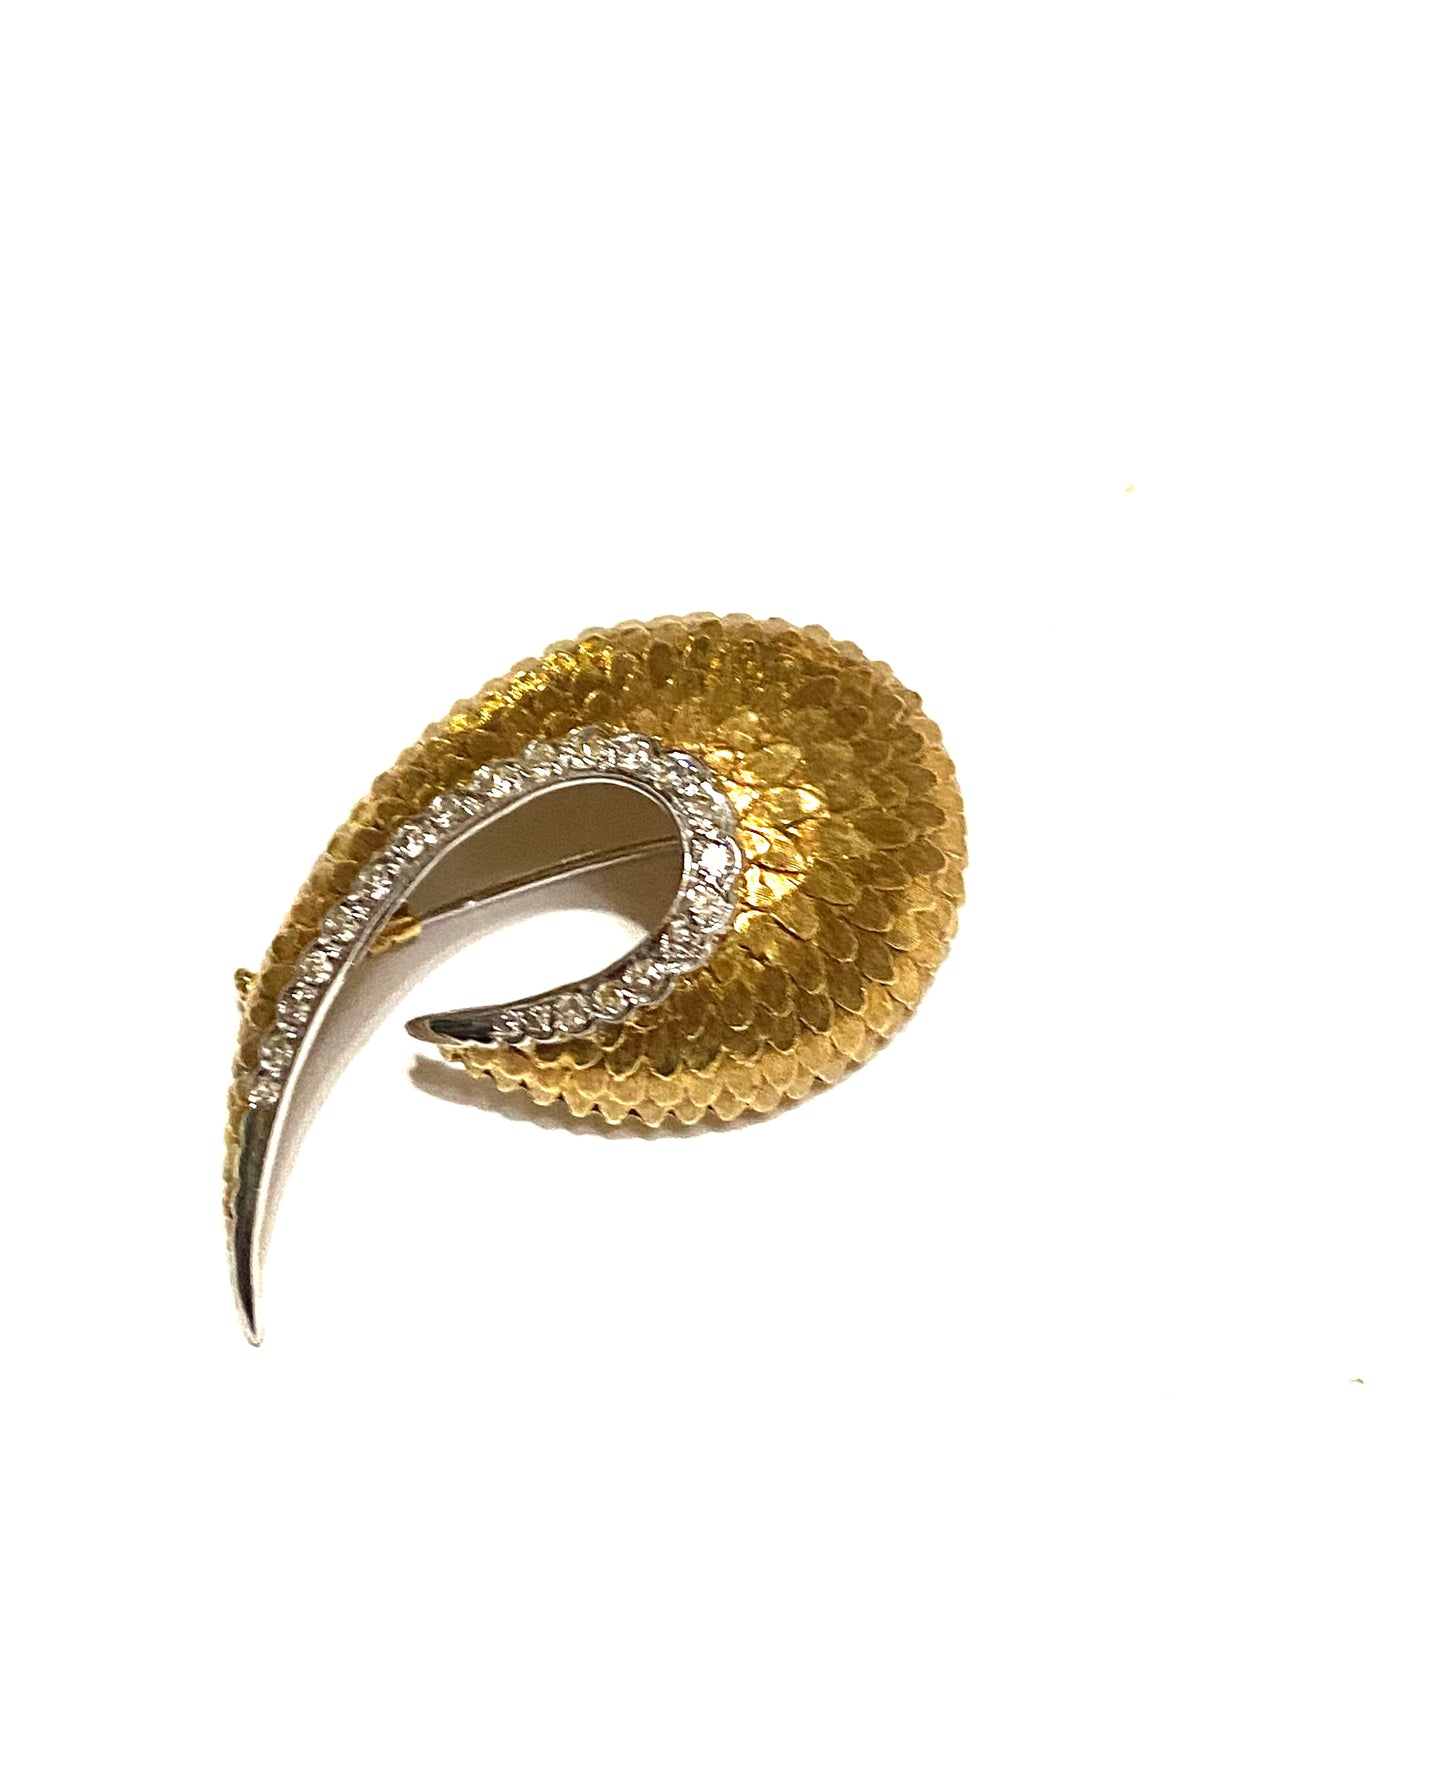 18ct 750 vintage gold and diamond brooch